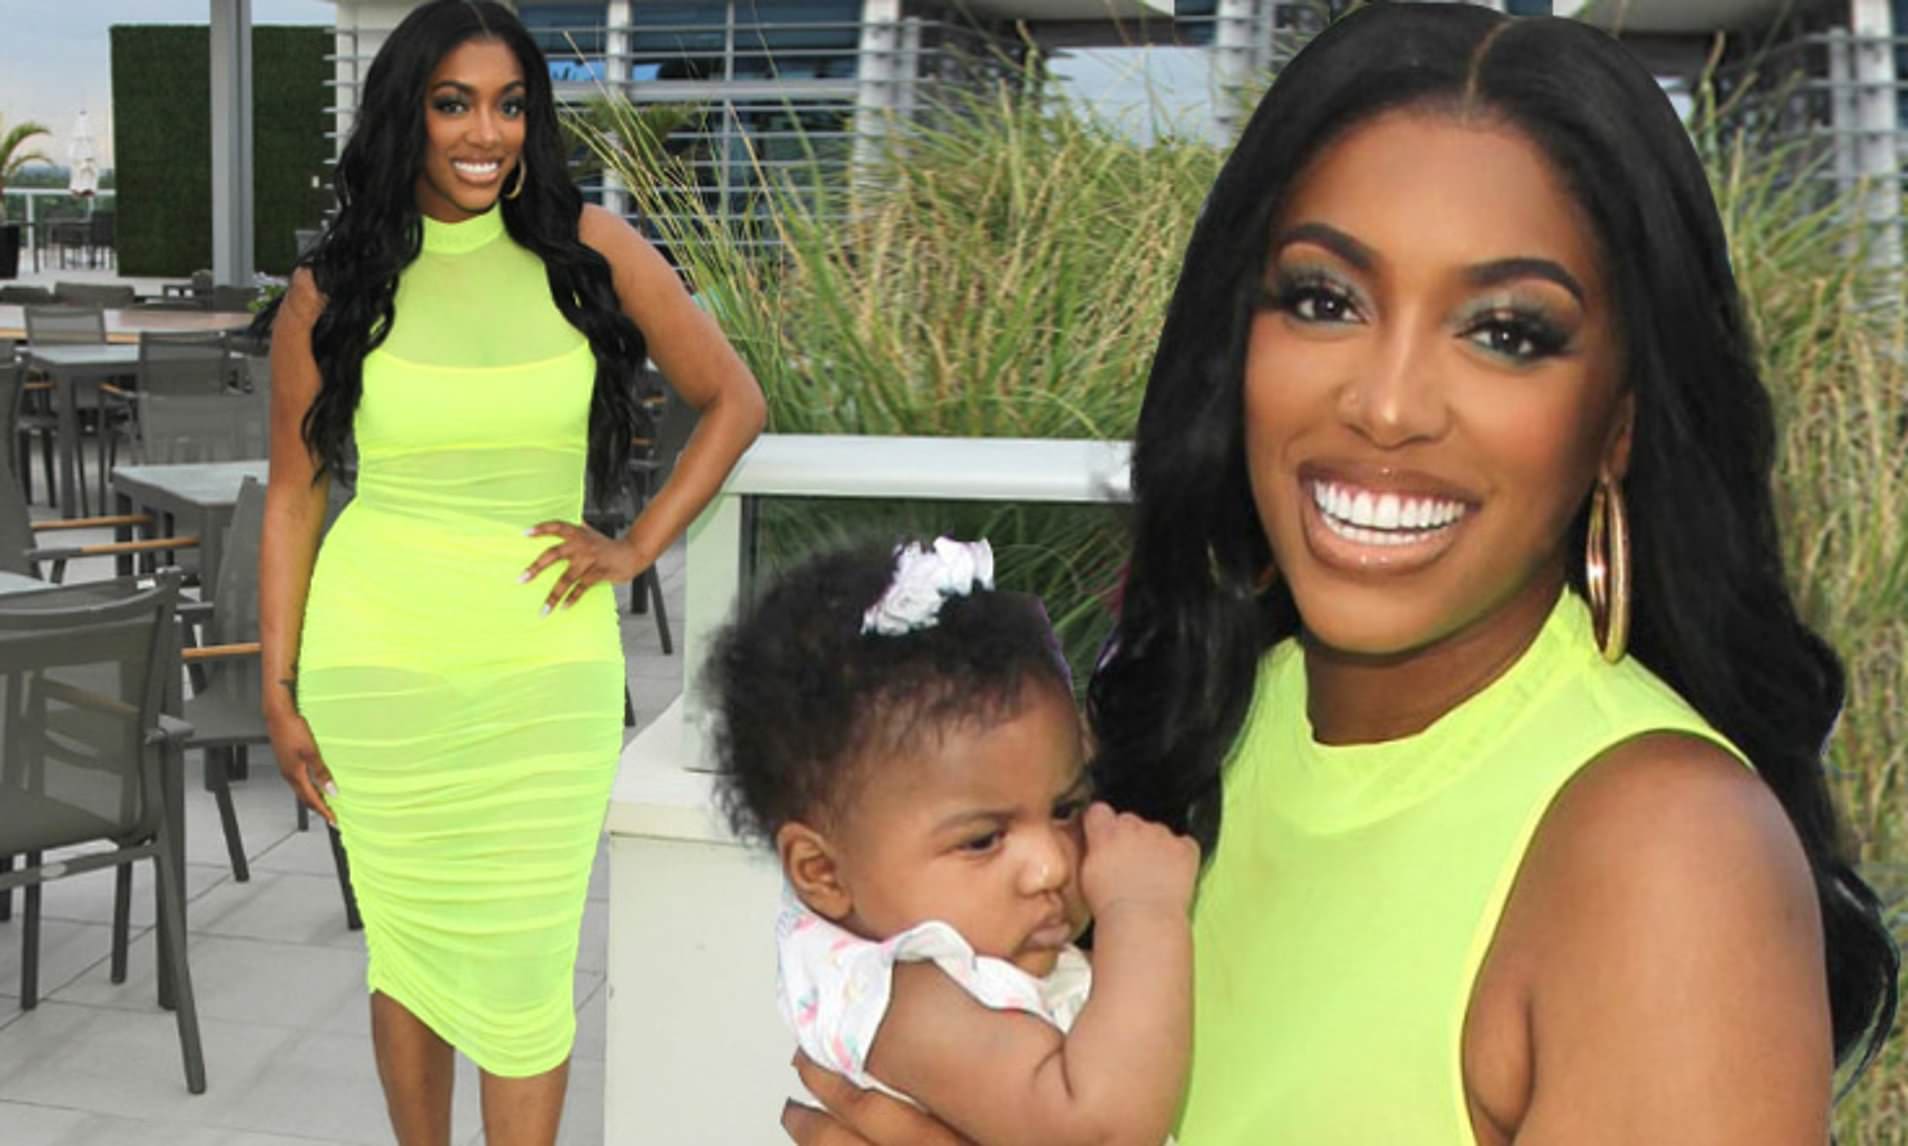 Porsha Williams Had The Best Time During Brandy And Monica Verzuz - See The Video!